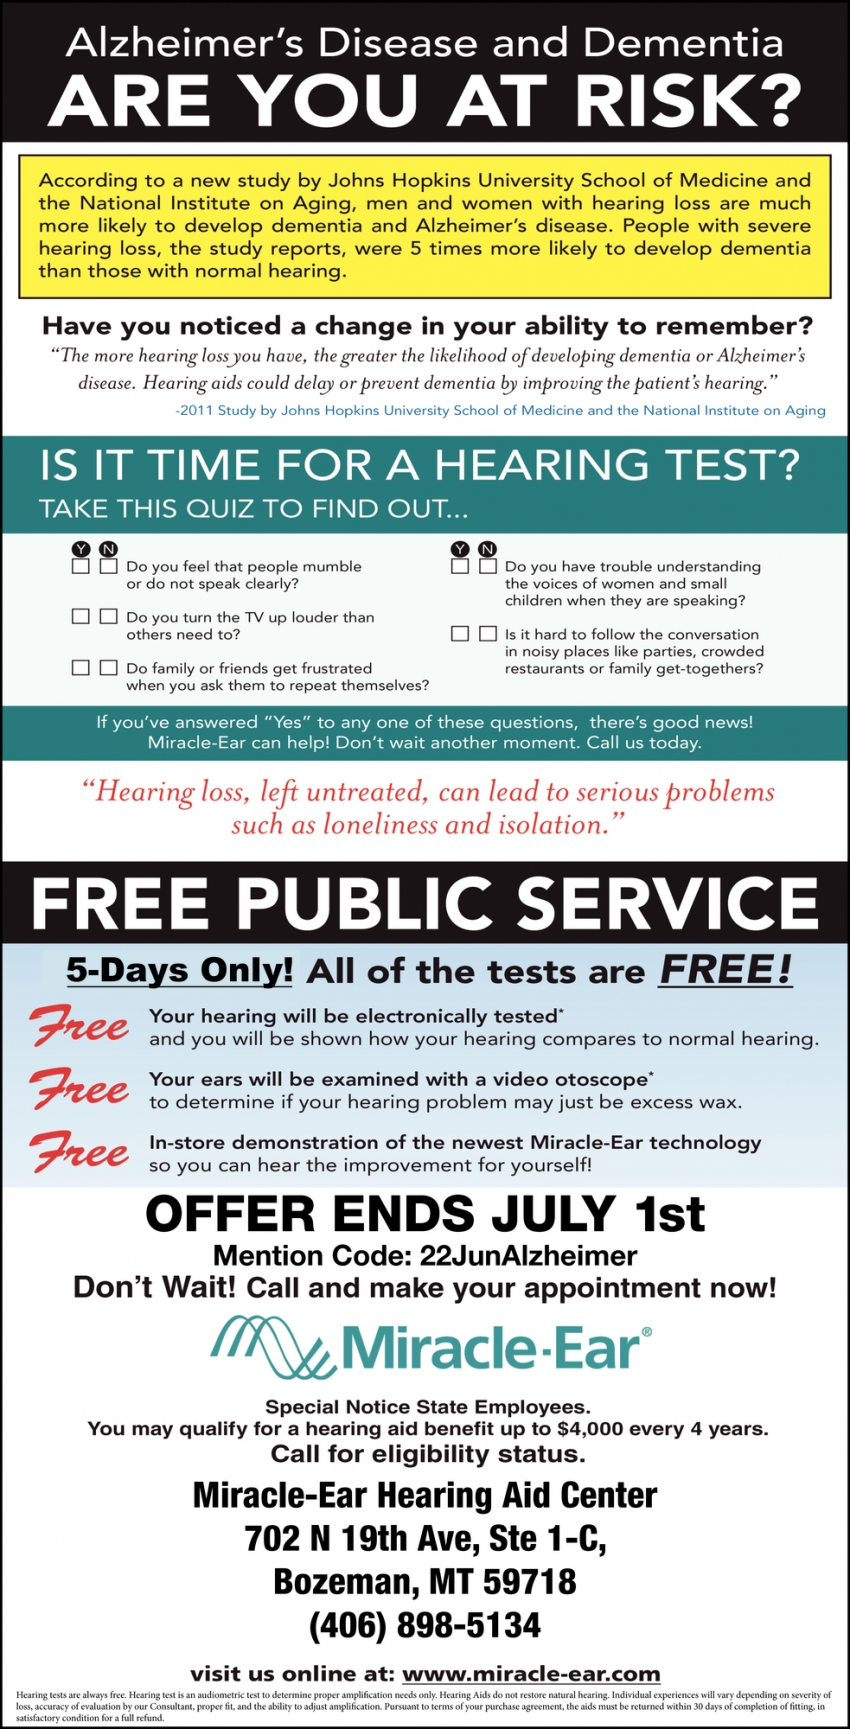 Is It Time for a Hearing Test?